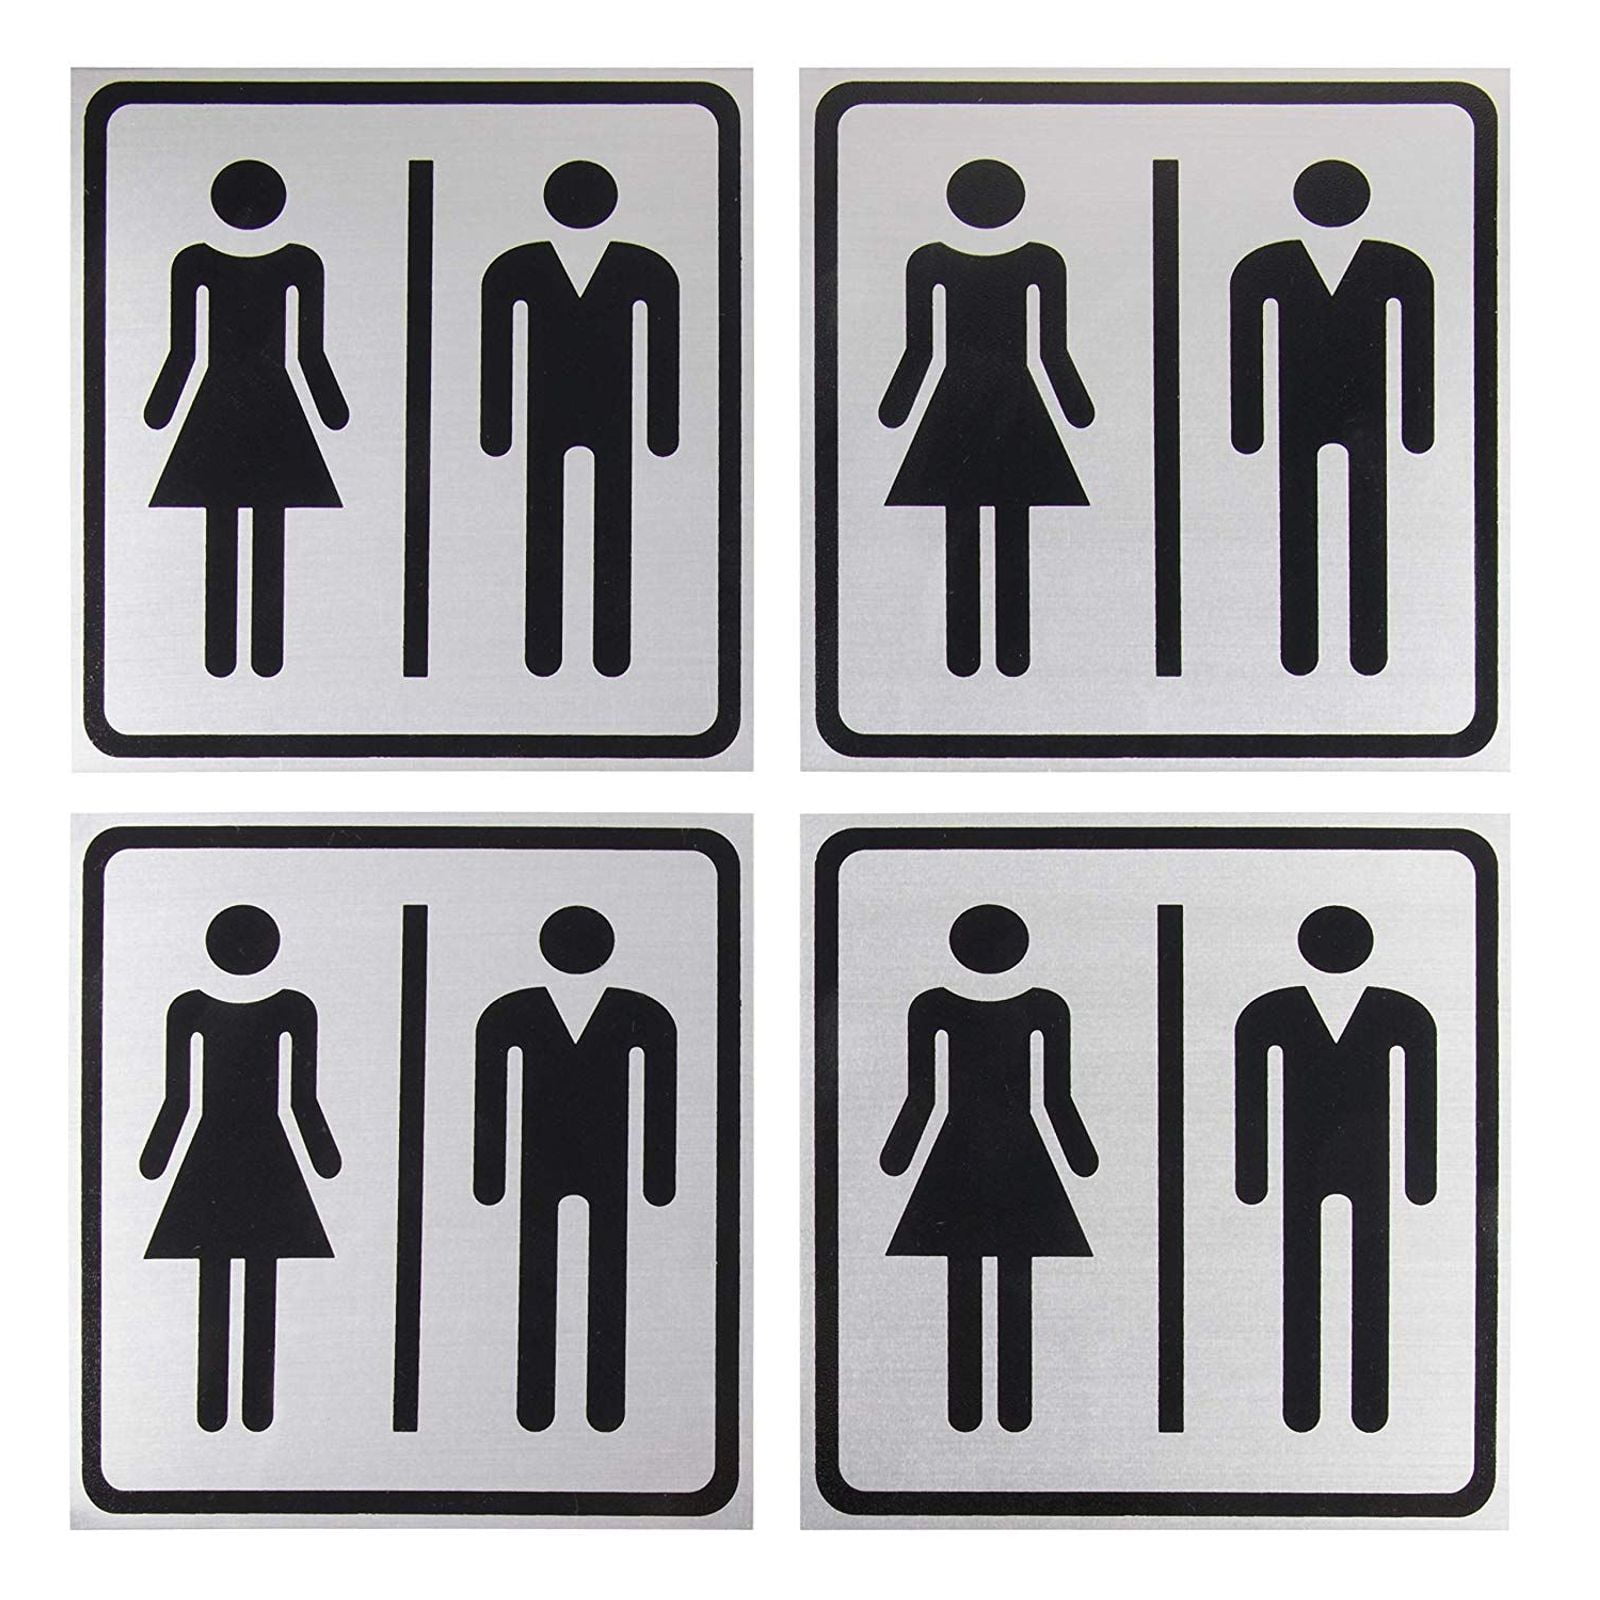 Gents And Symbol Toilet Sign Or Sticker Blue On White Size 150mm x 150mm 